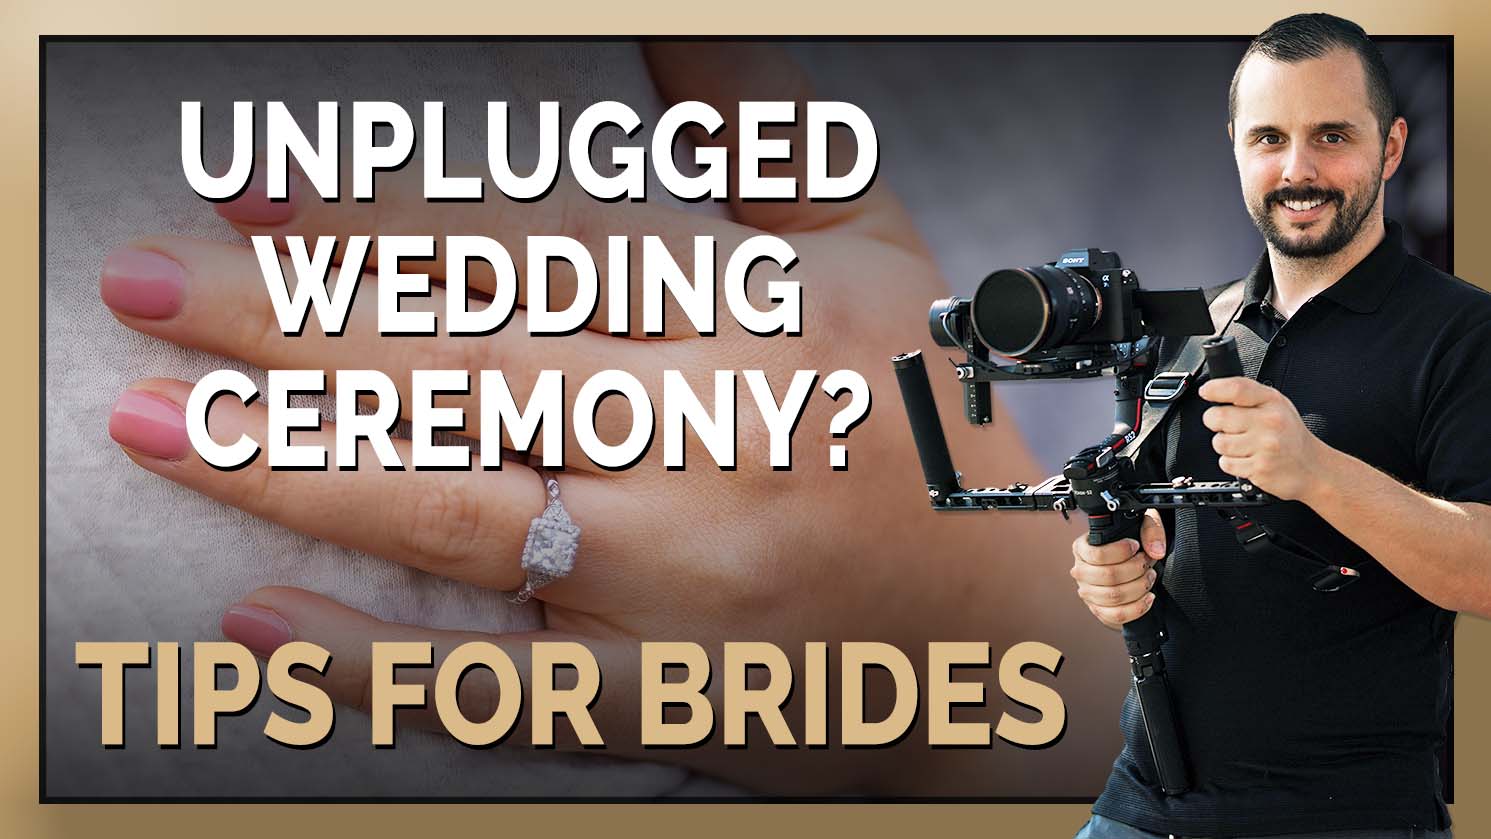 Should I Have An Unplugged Ceremony